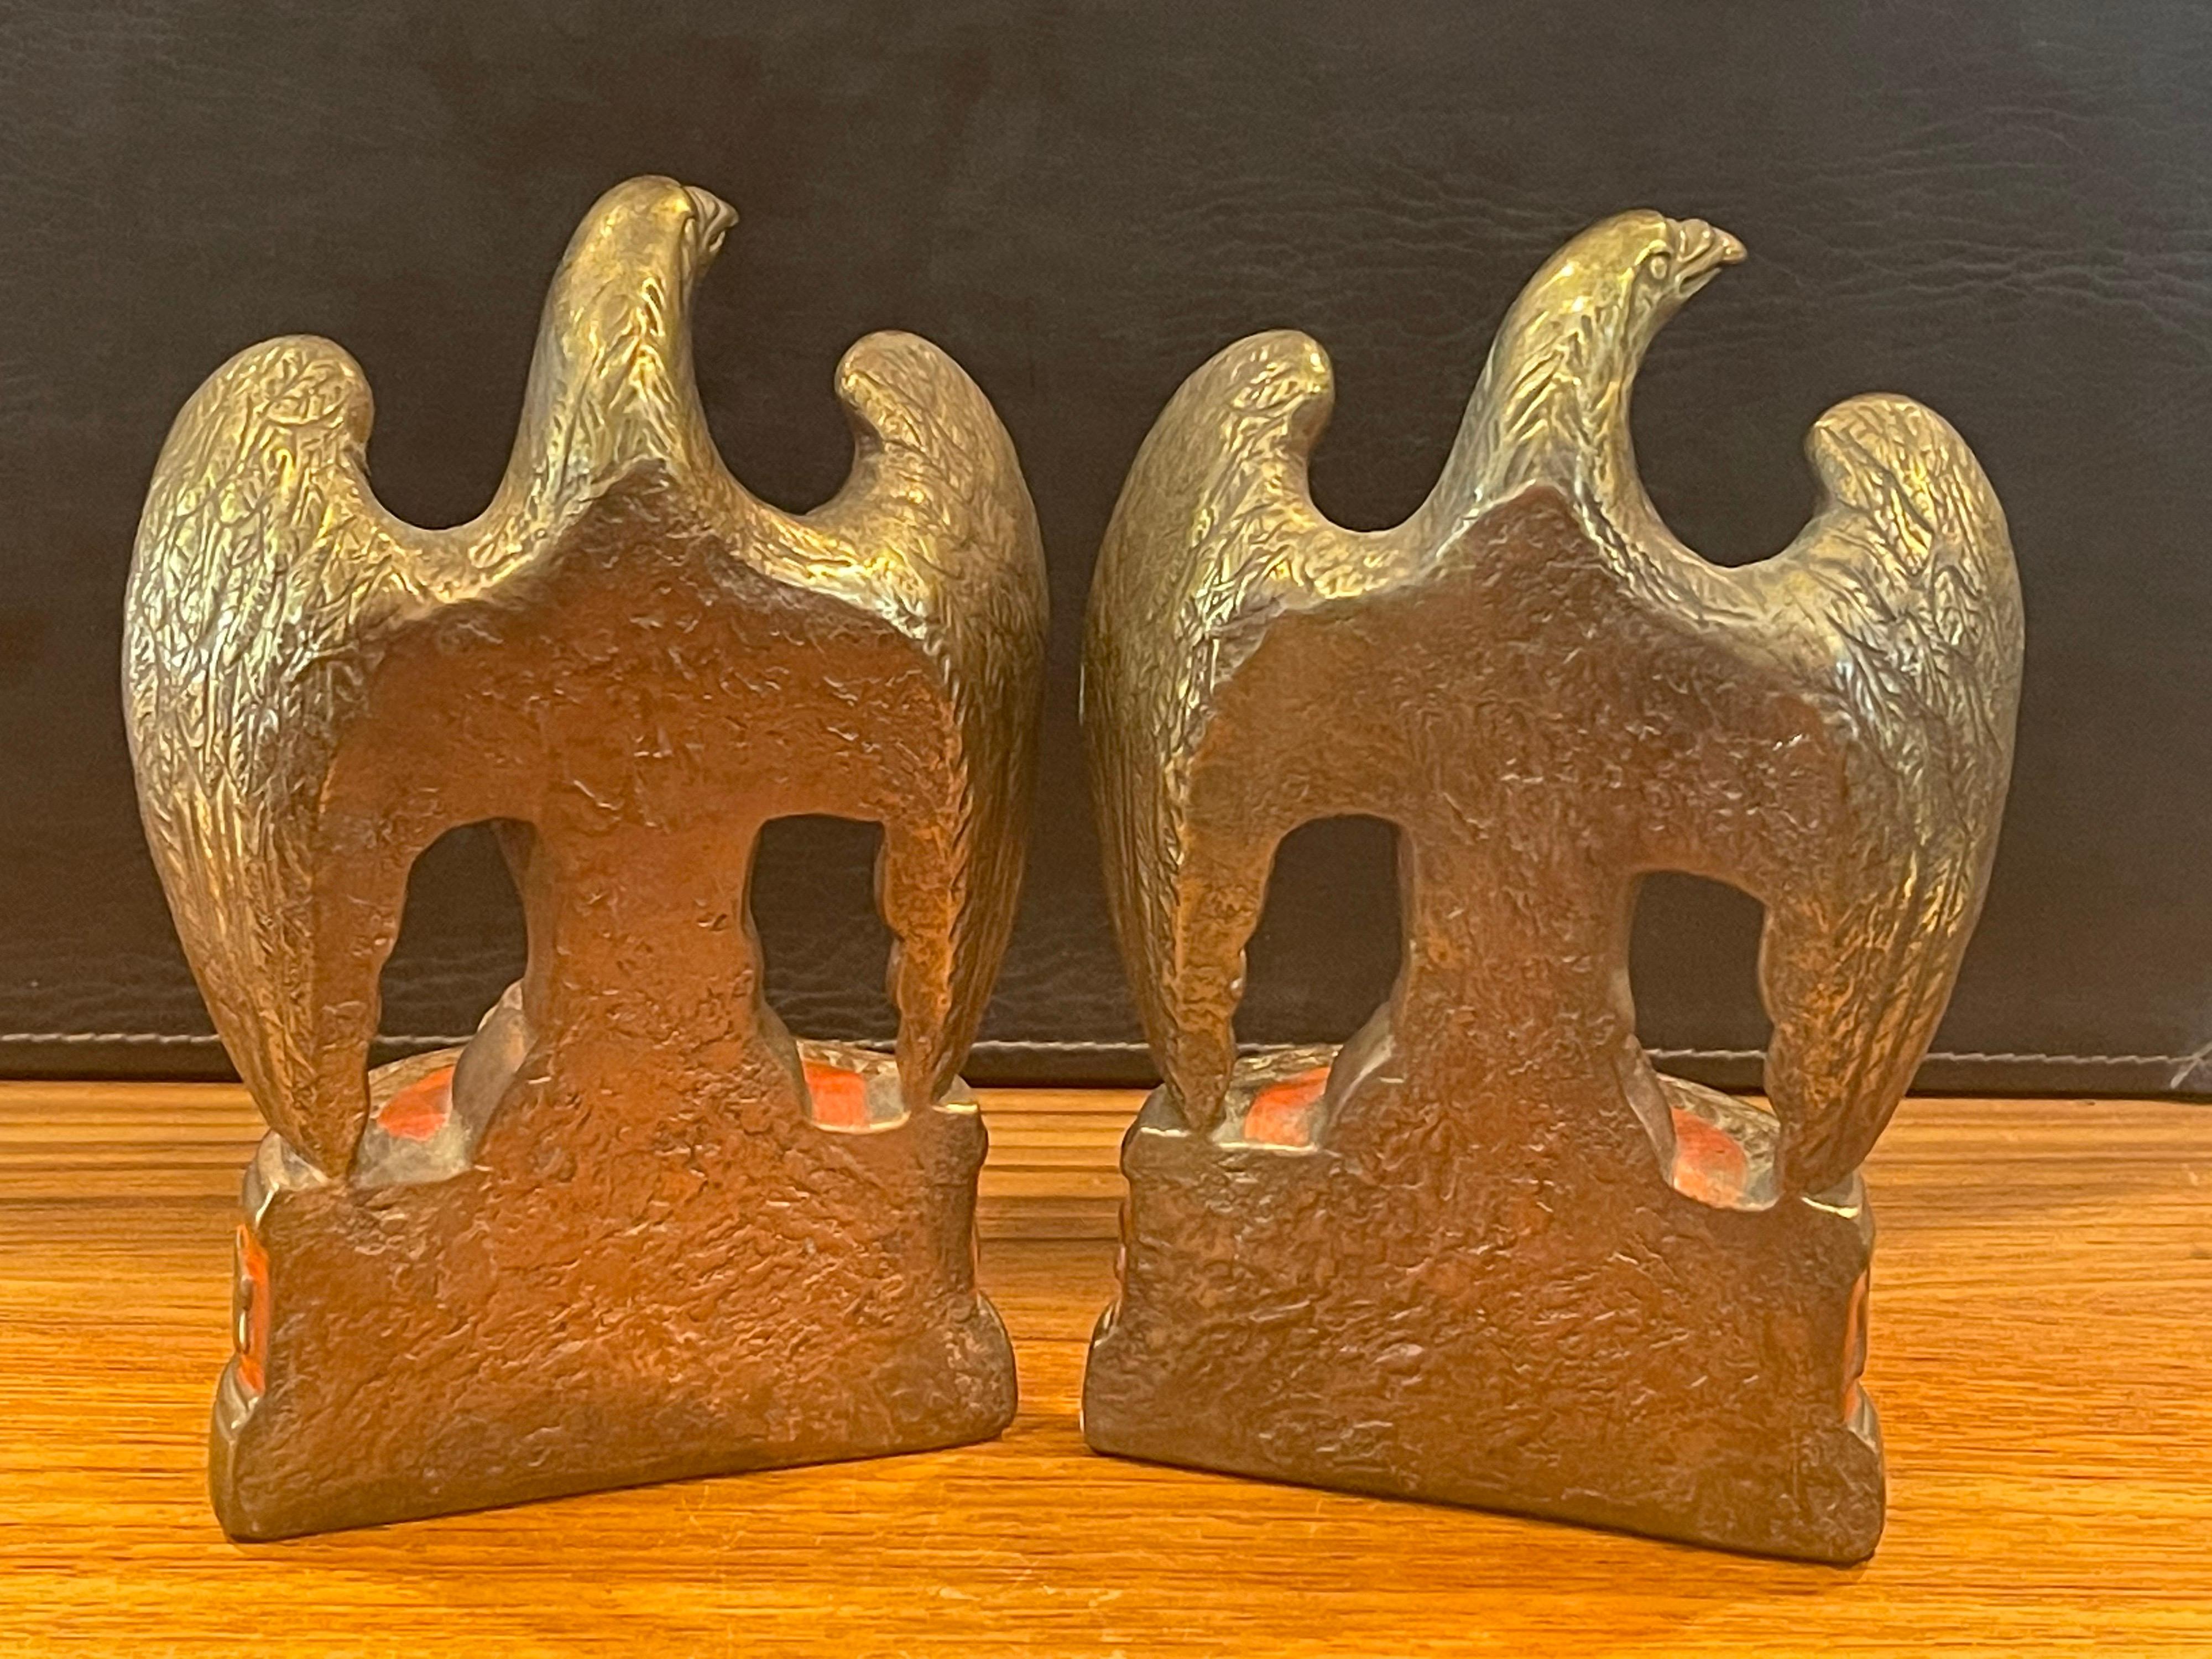 Pair of Bronze Clad American Eagle 'John Kennedy JFK' Bookends 1